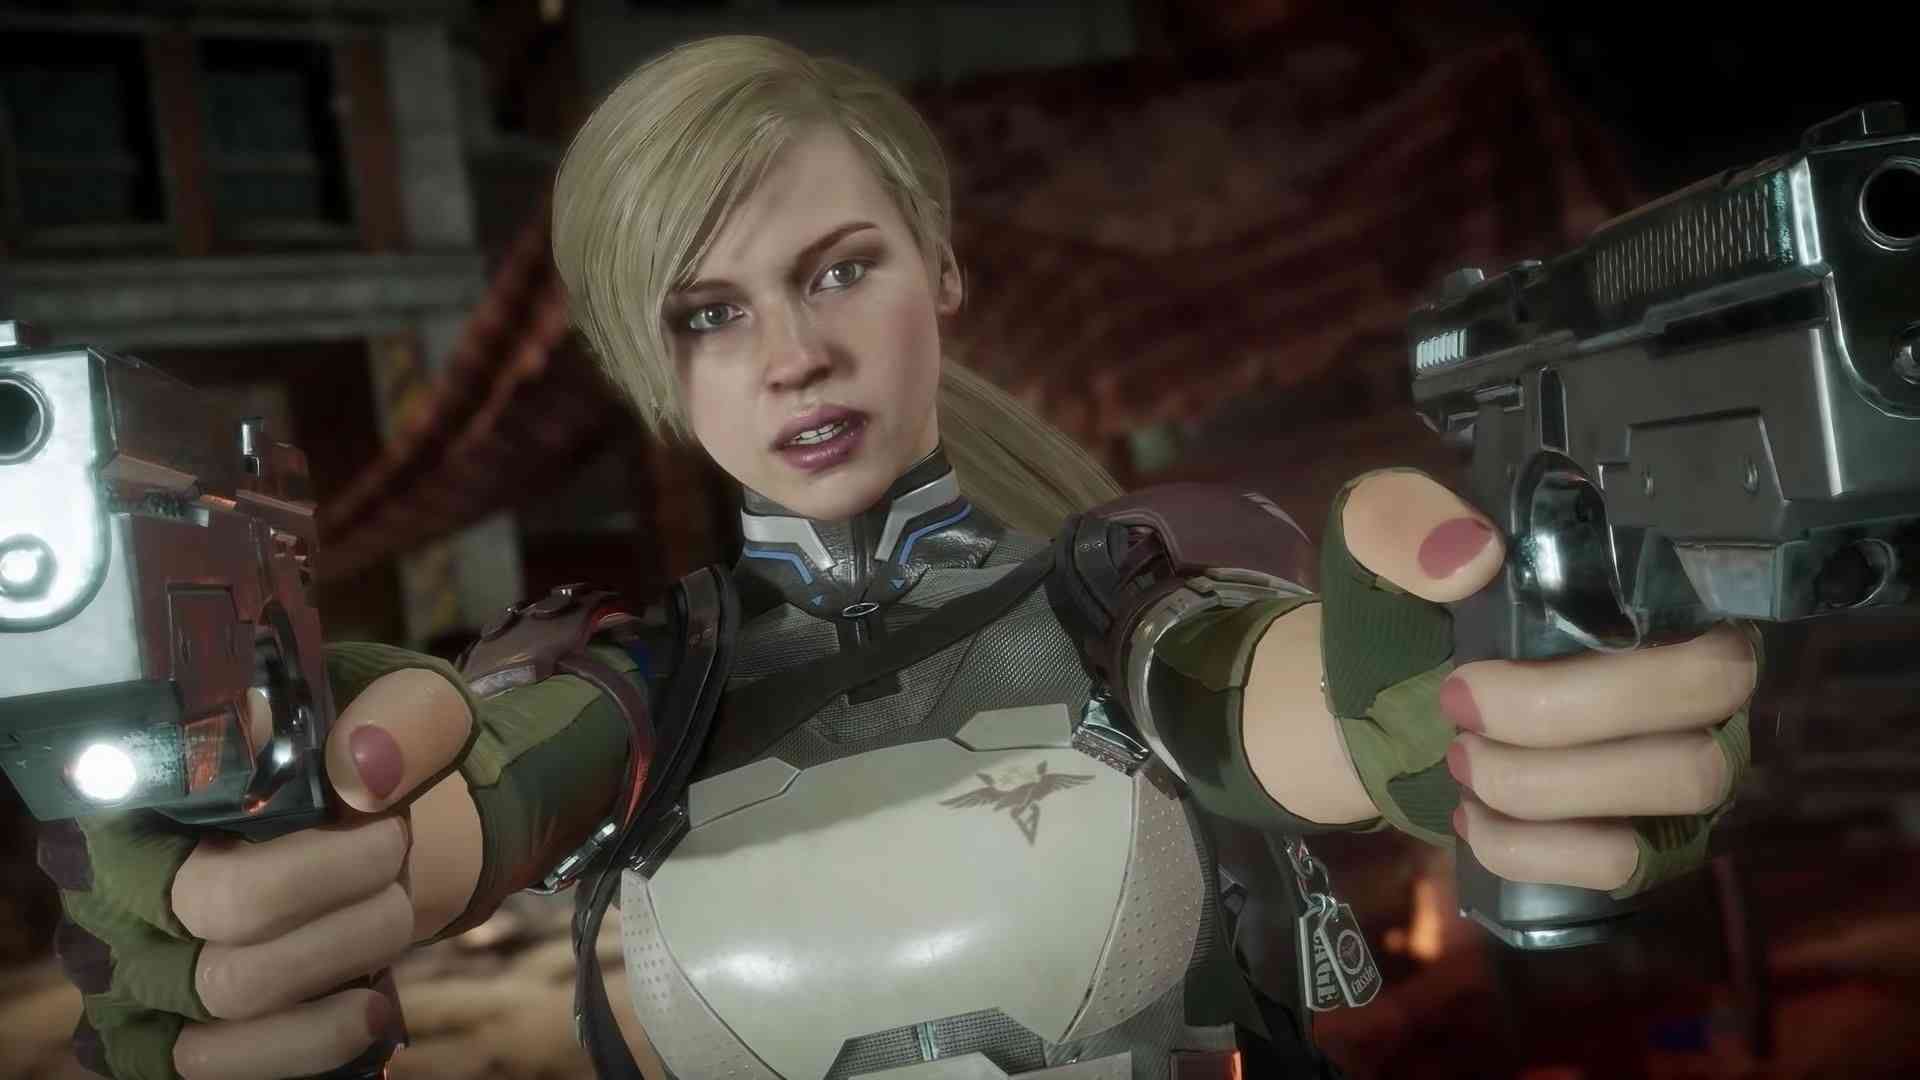 New Mortal Kombat 11 Trailer Reveals Cassie Cage and Her 